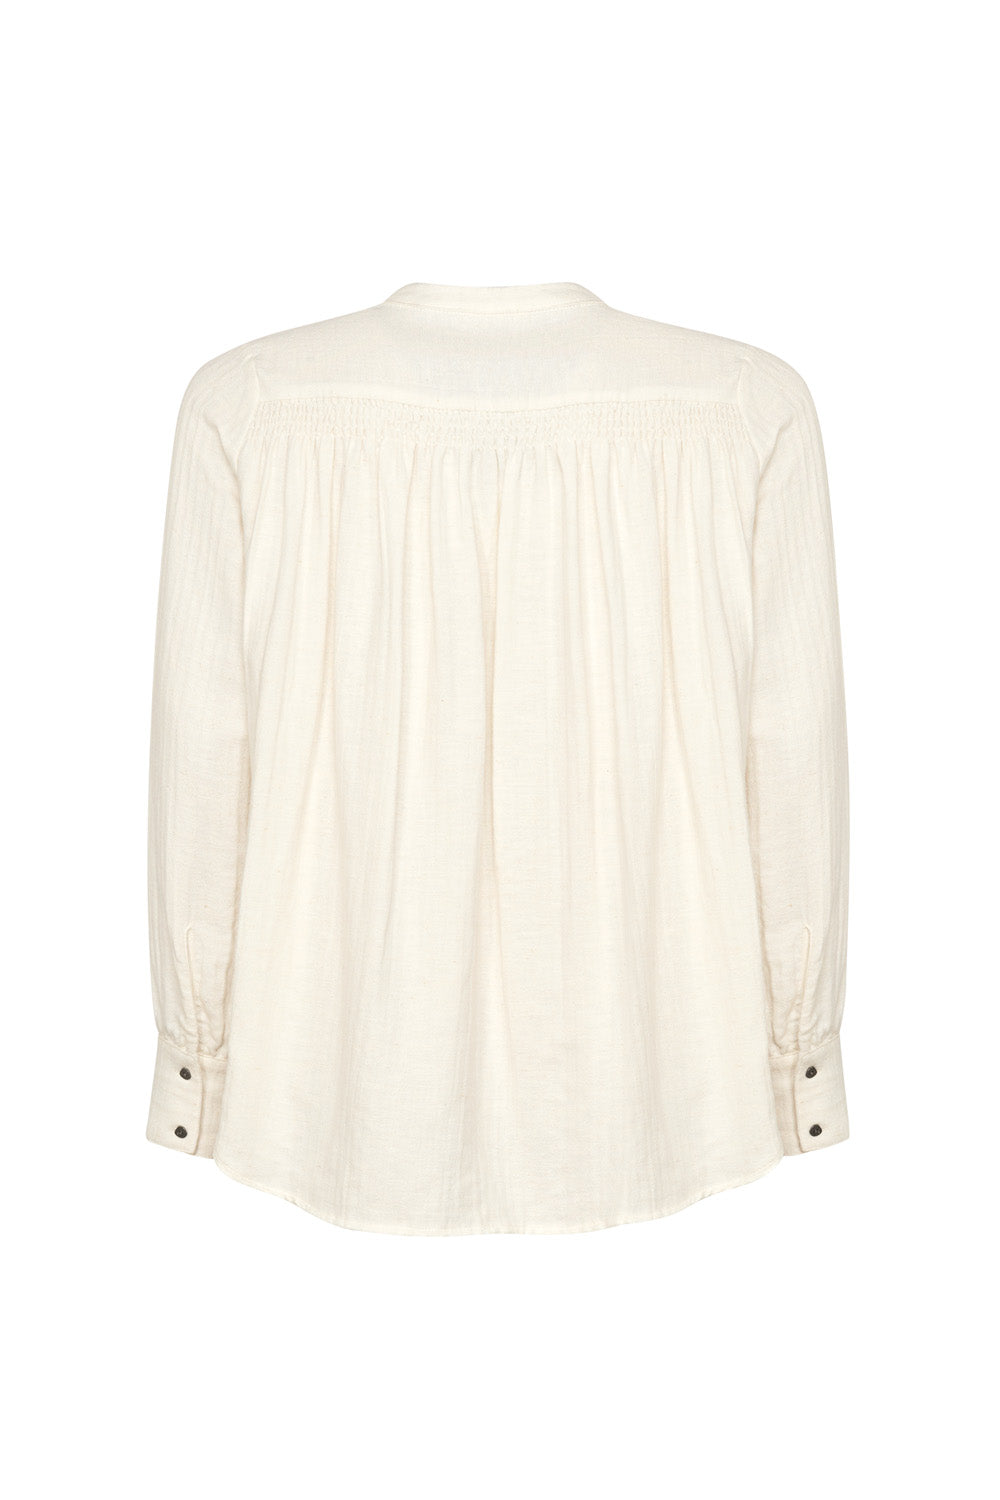 MADLY SWEETLY COTTON TALE SHIRT - WINTER WHITE - THE VOGUE STORE